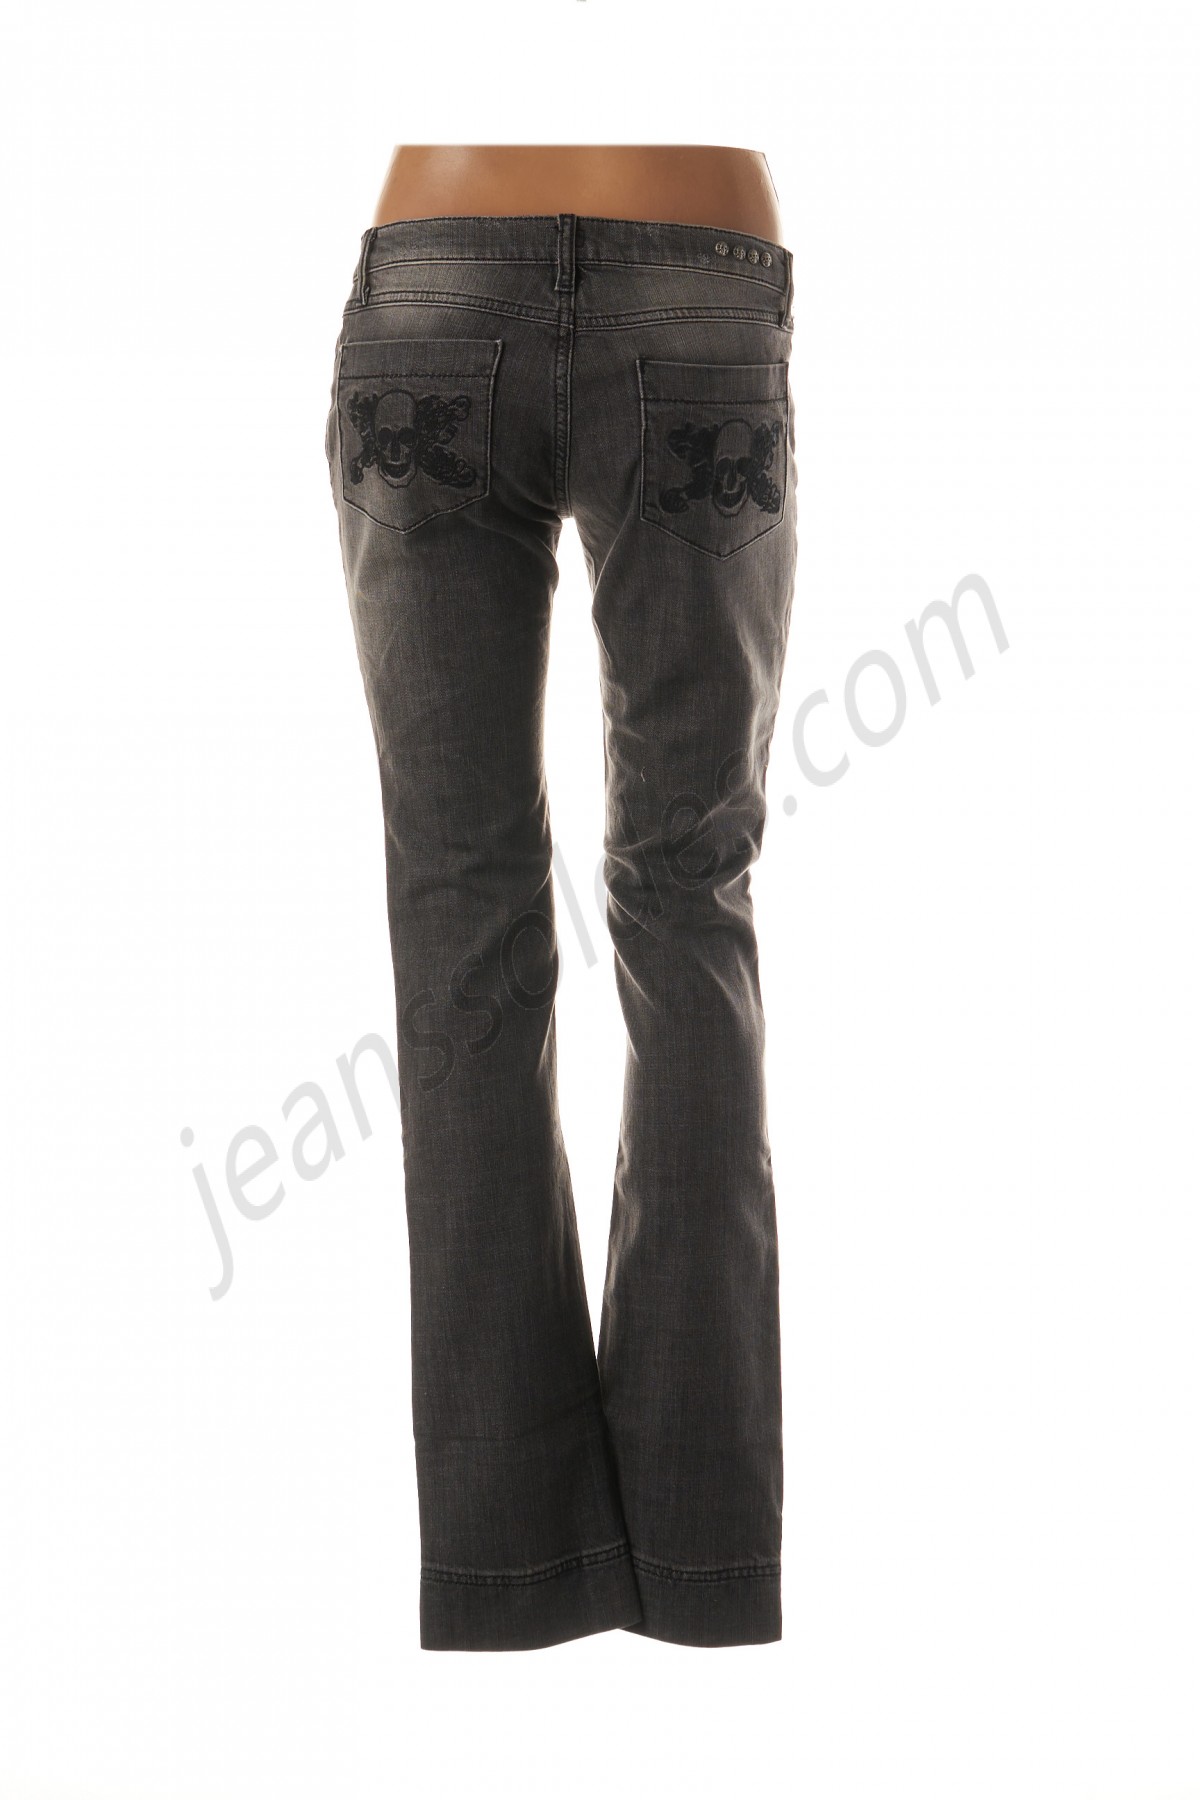 n&vy-Jeans coupe droite prix d’amis - -1